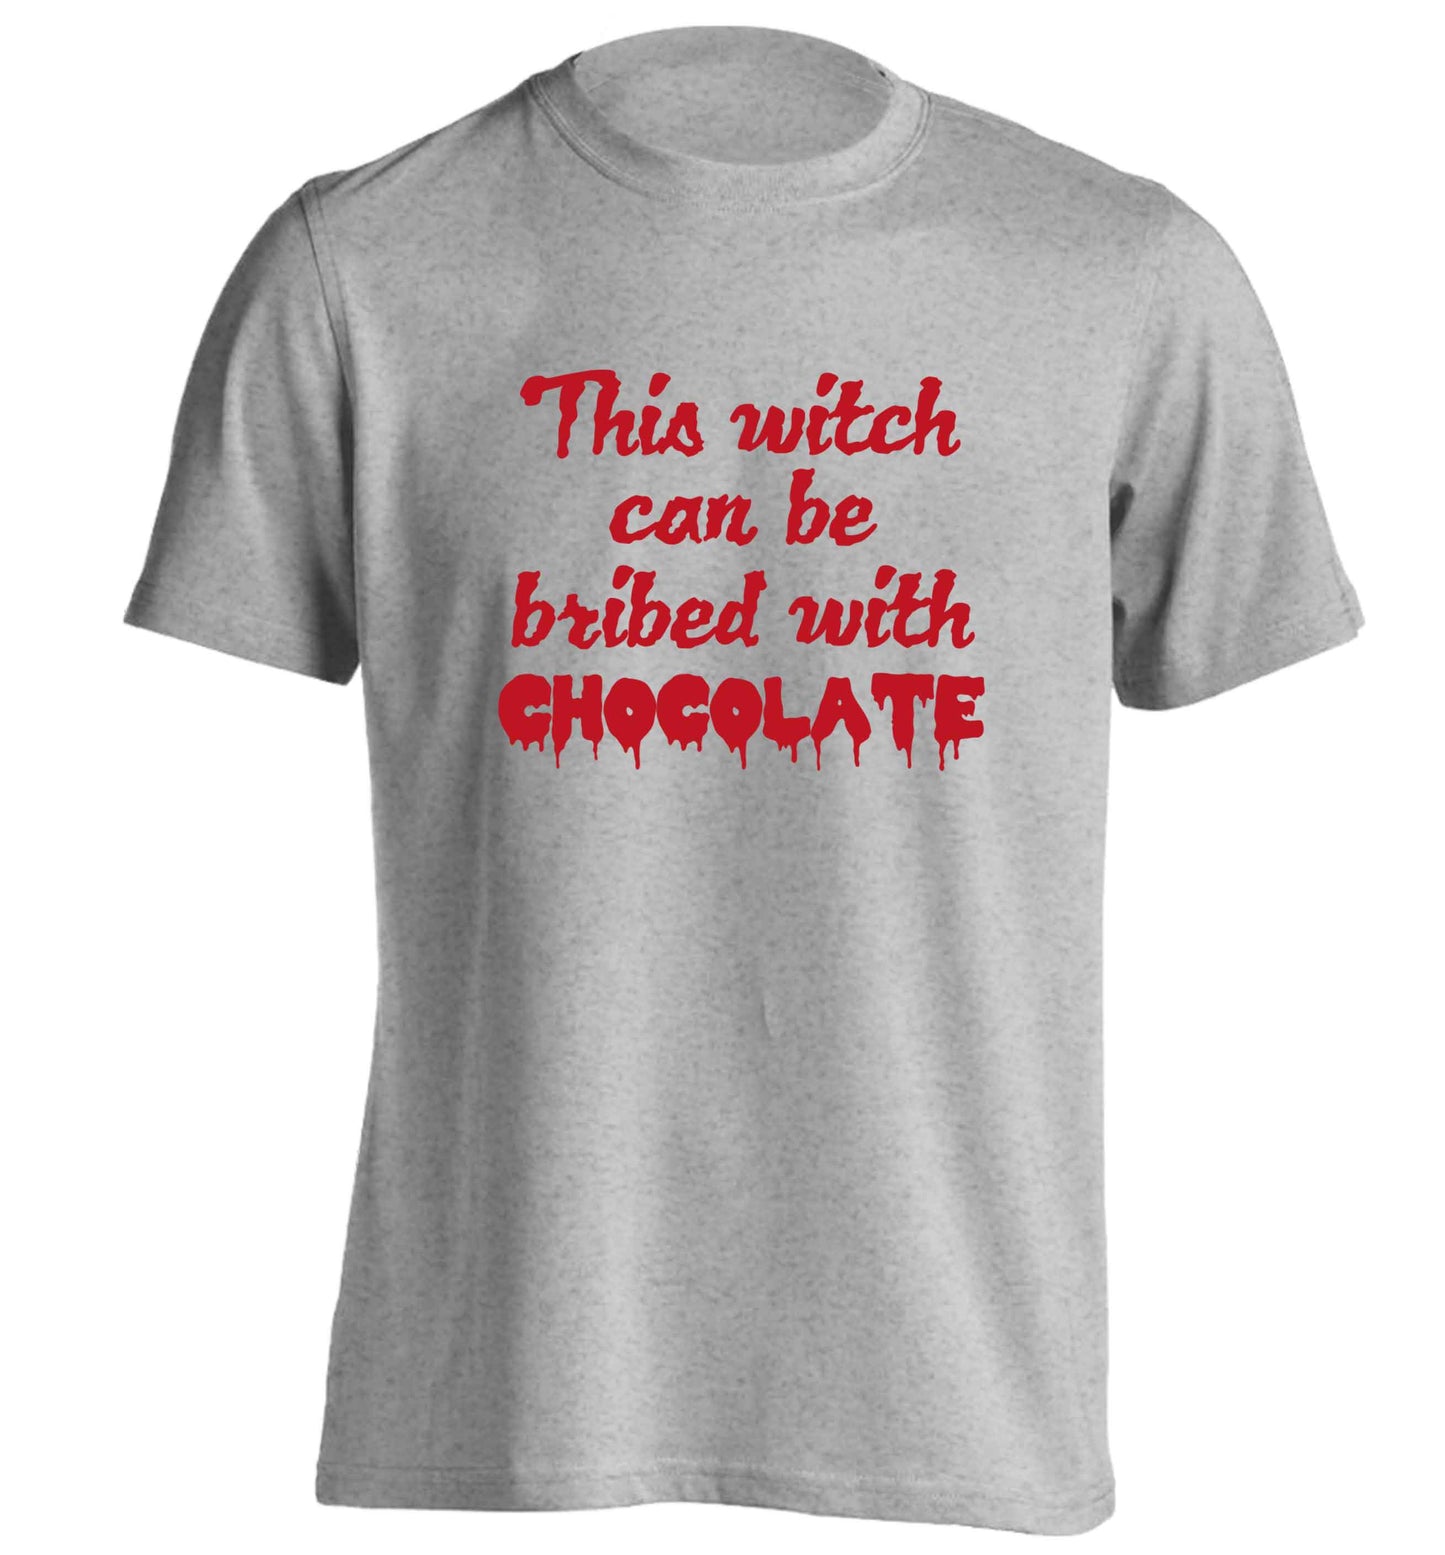 This witch can be bribed with chocolate adults unisex grey Tshirt 2XL